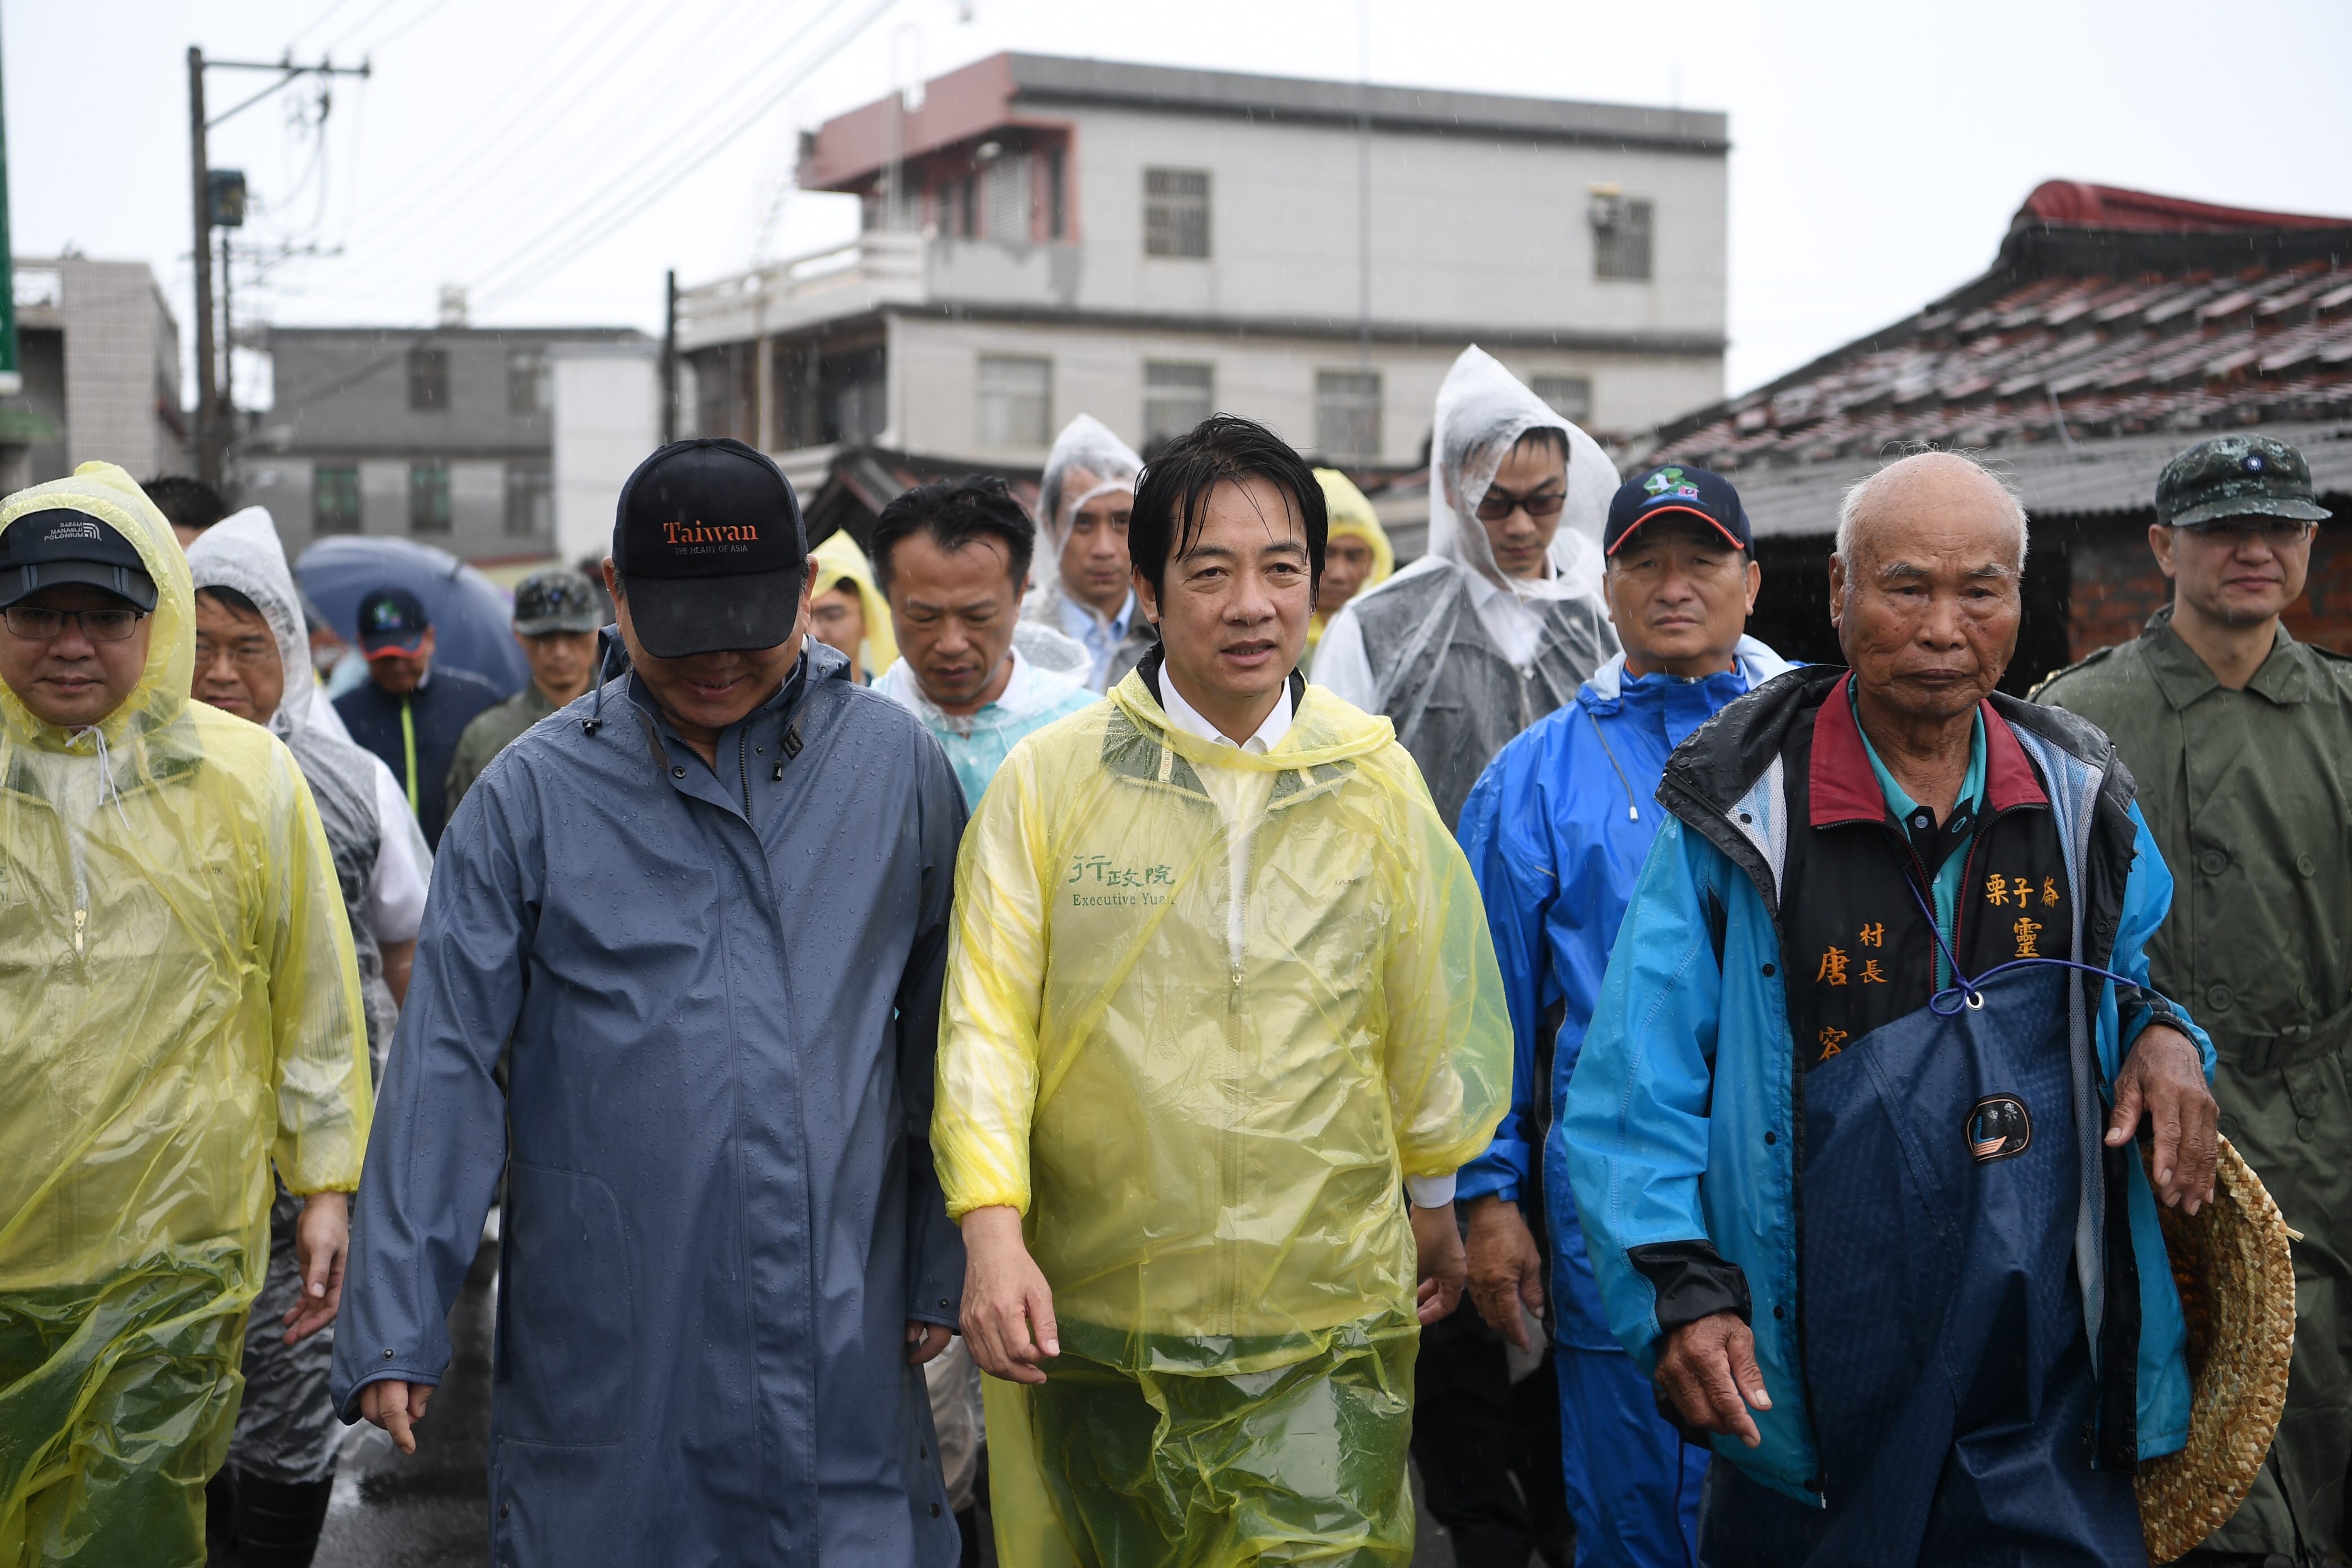 Premier Lai inspects aftermath of flooding in Chiayi County